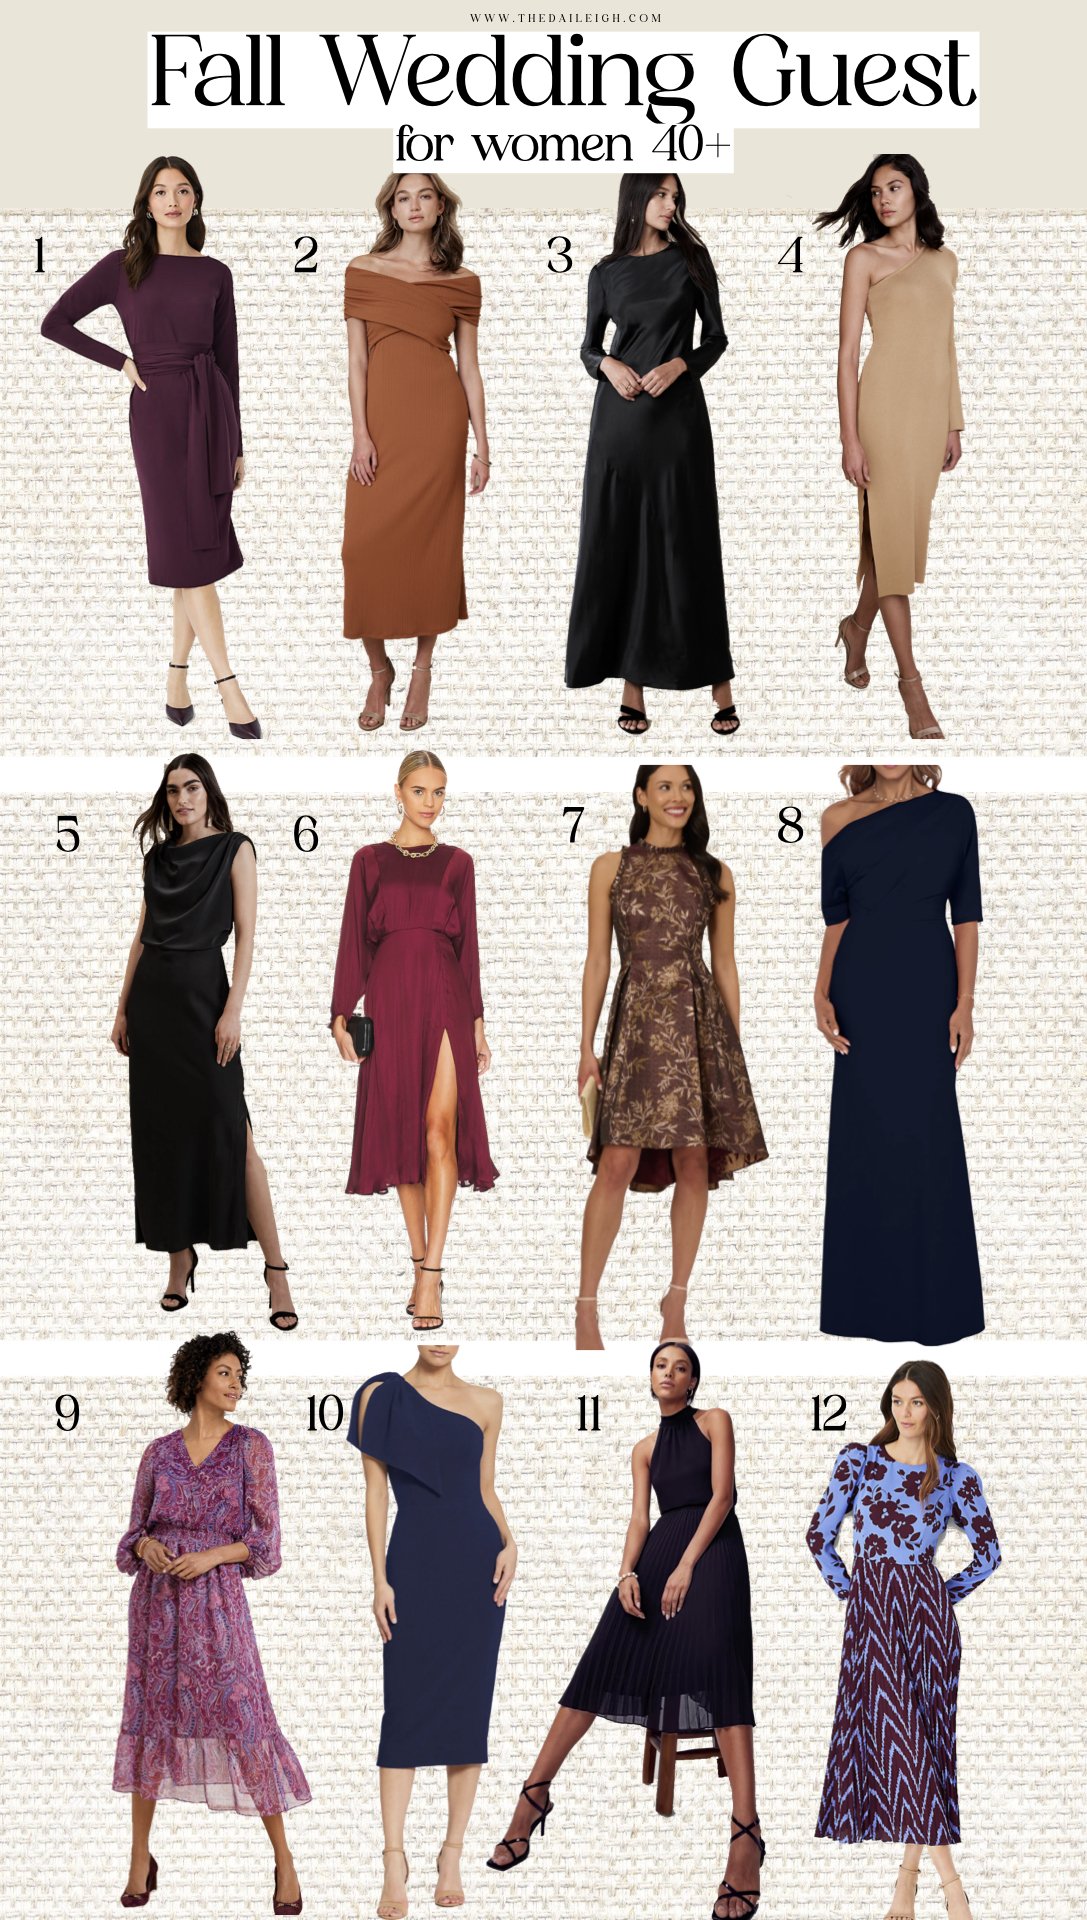 Fall Wedding Guest Dresses for Women Over 40 — THE DAILEIGH